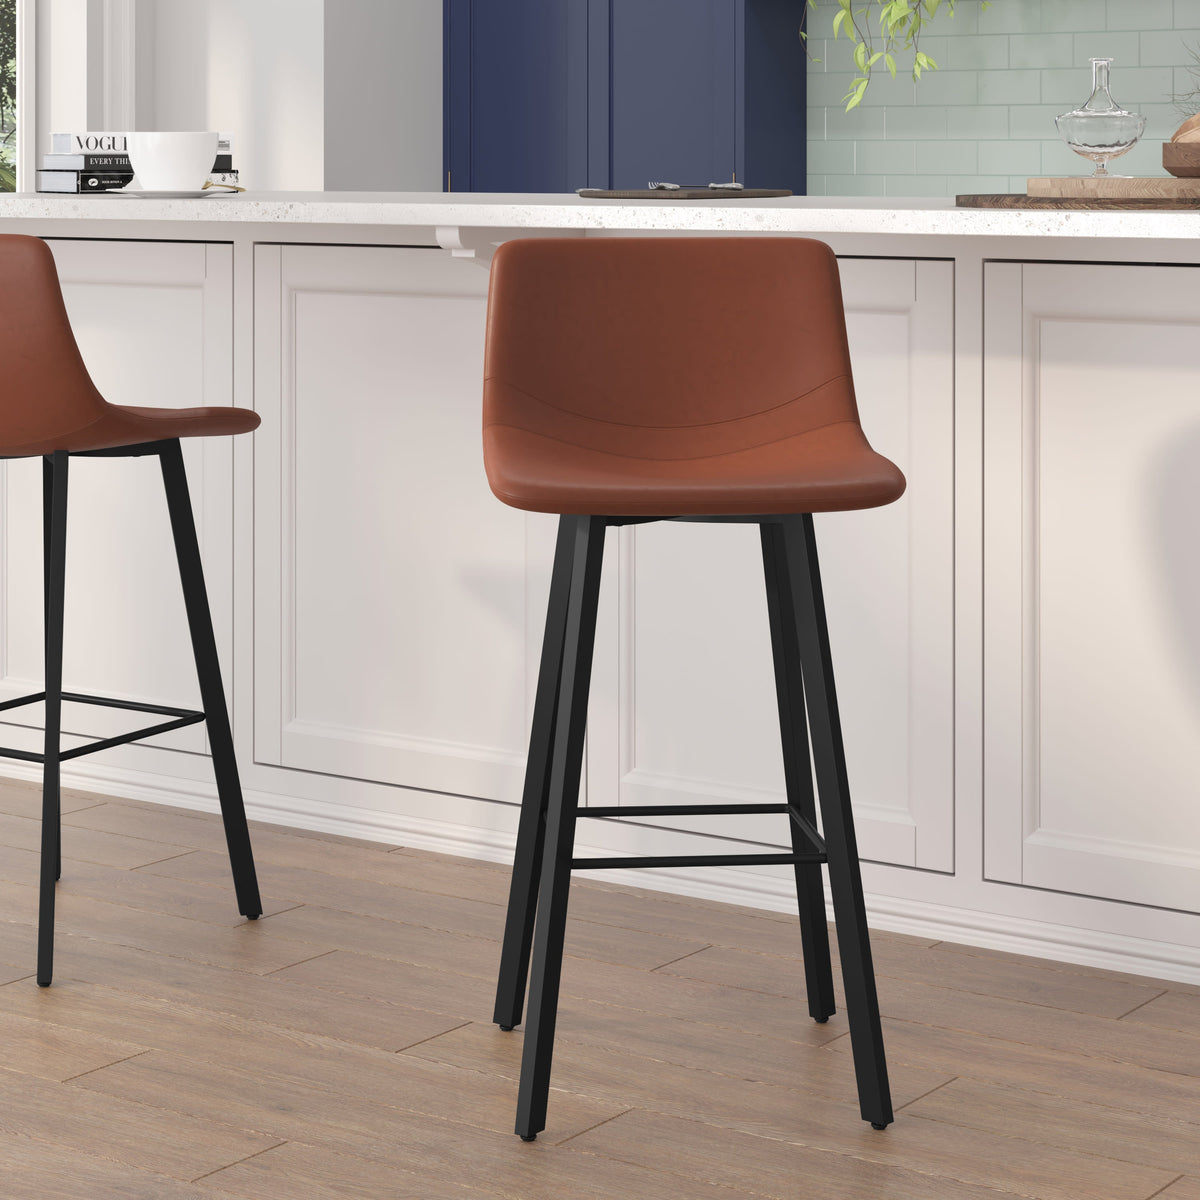 Cognac LeatherSoft |#| Set of 2 Commercial Indoor Armless Iron Barstools - Cognac LeatherSoft